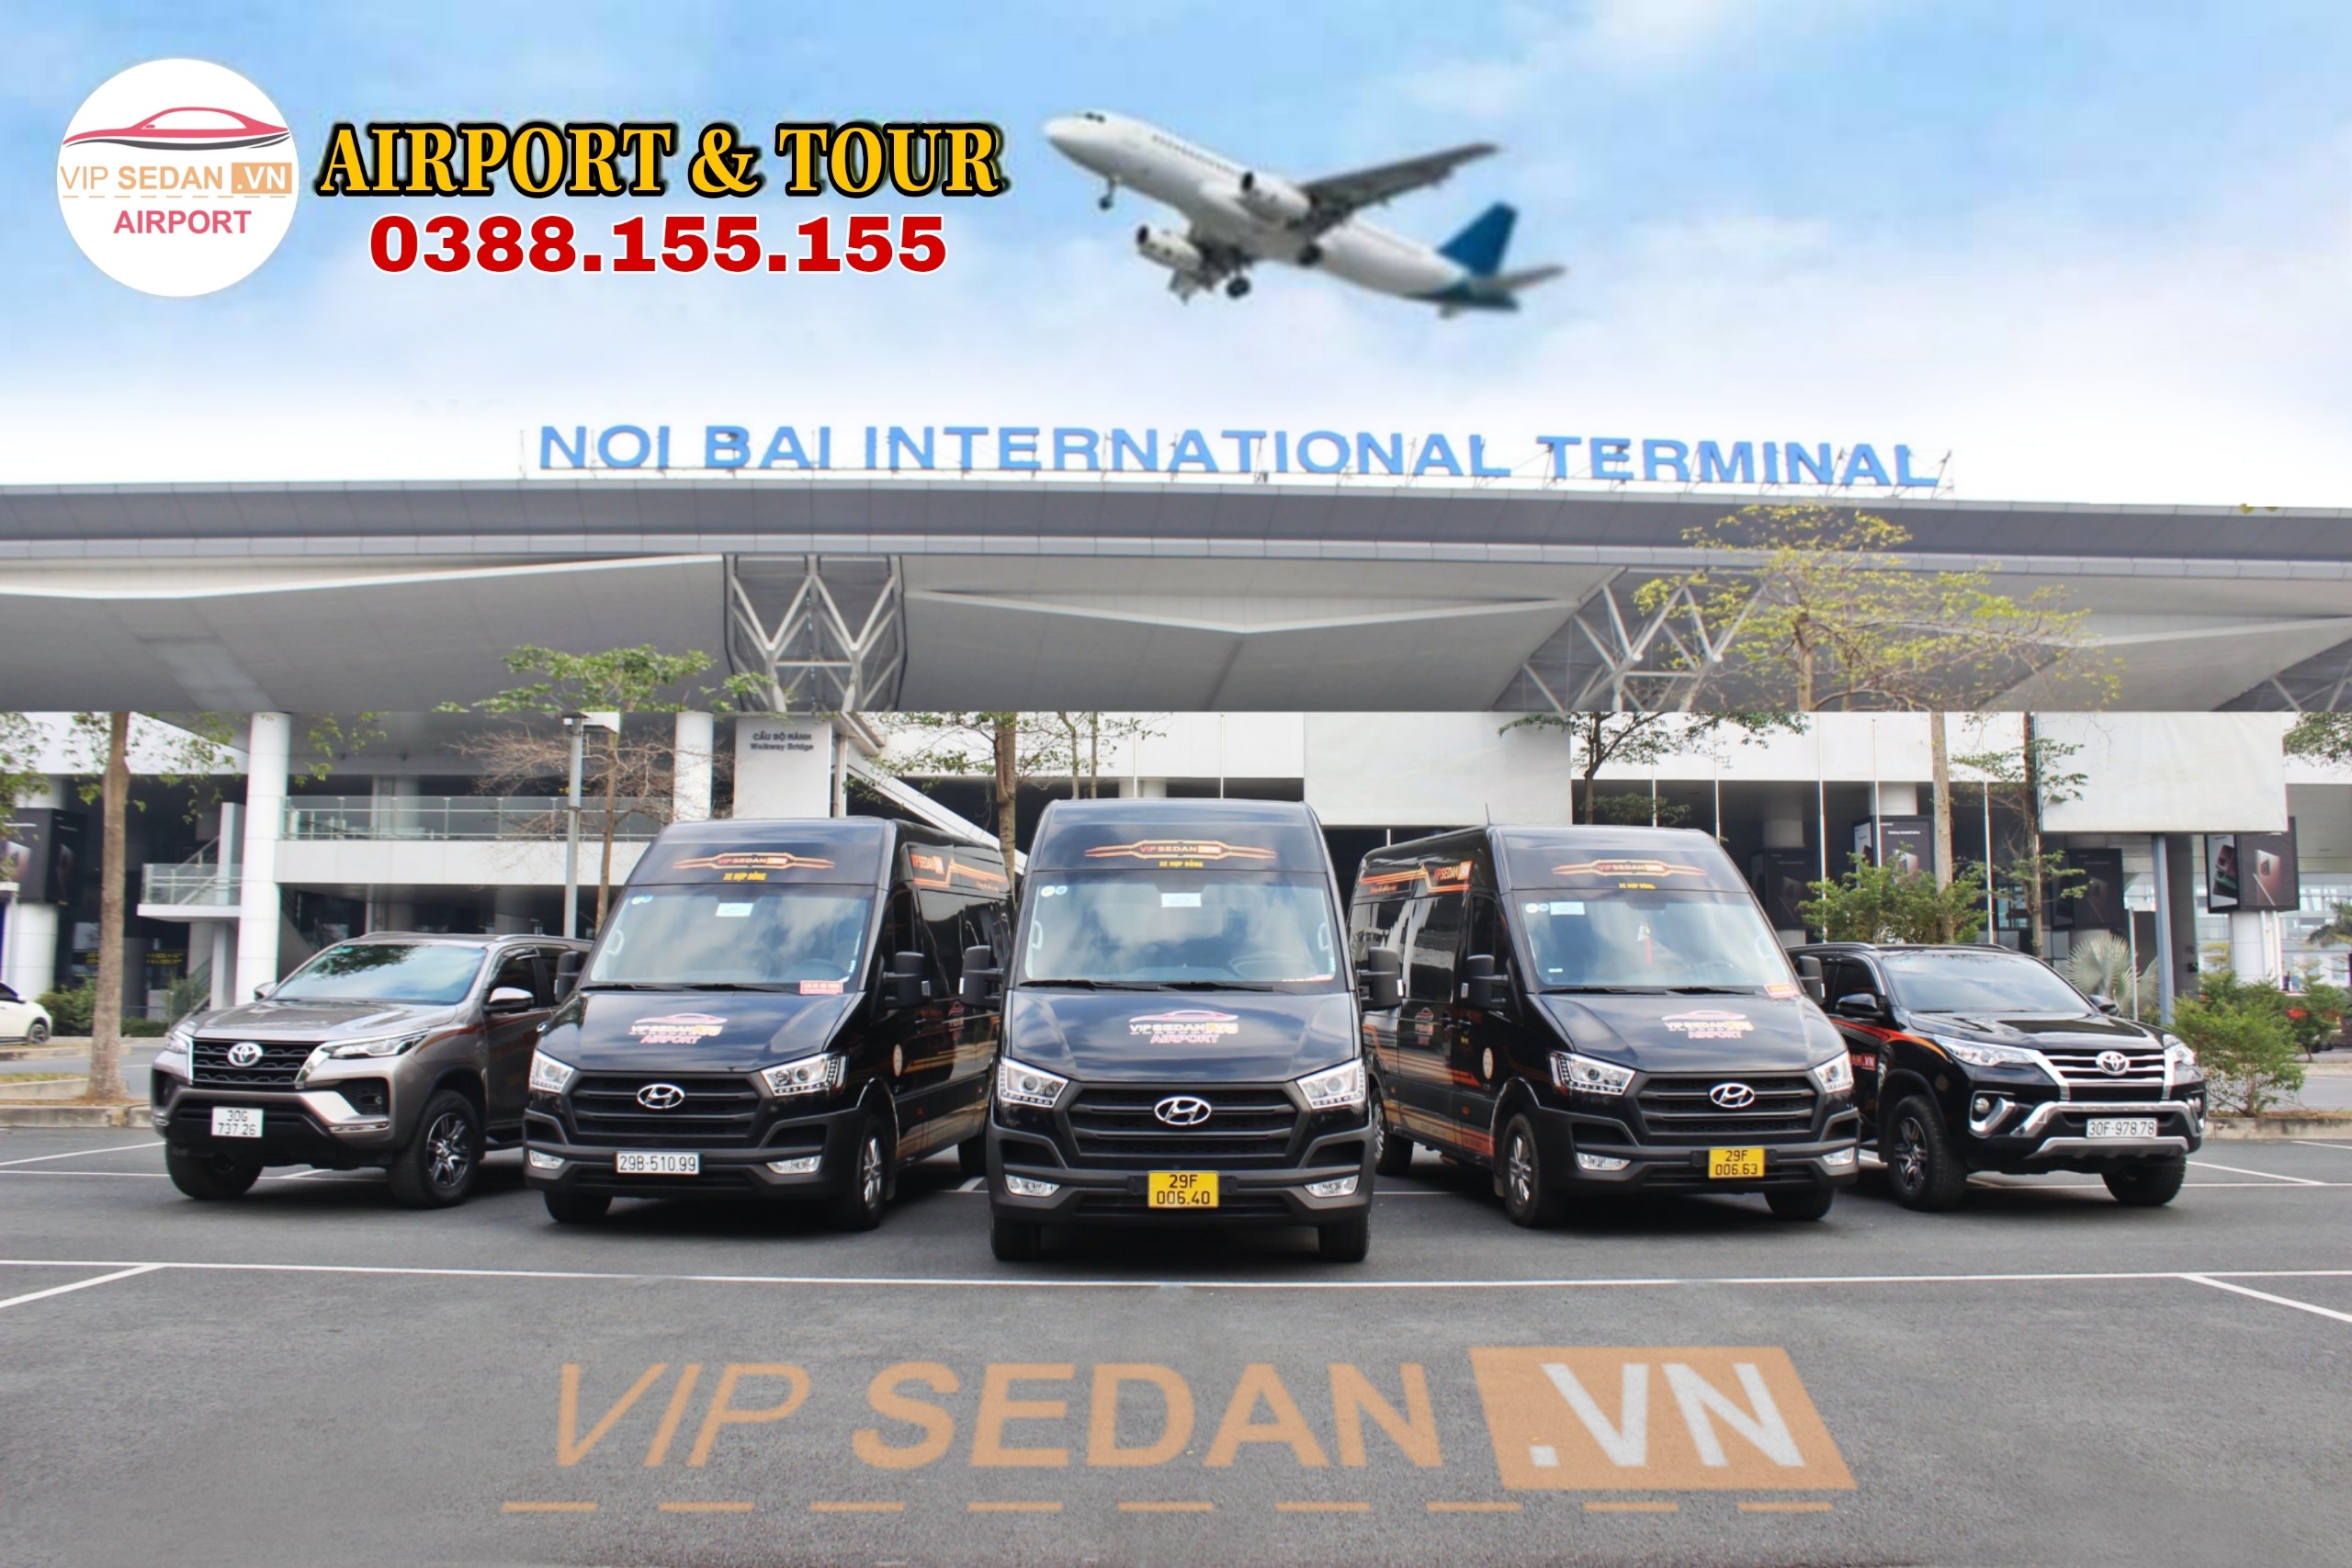 Private car rental from noi bai airport to Ha Noi